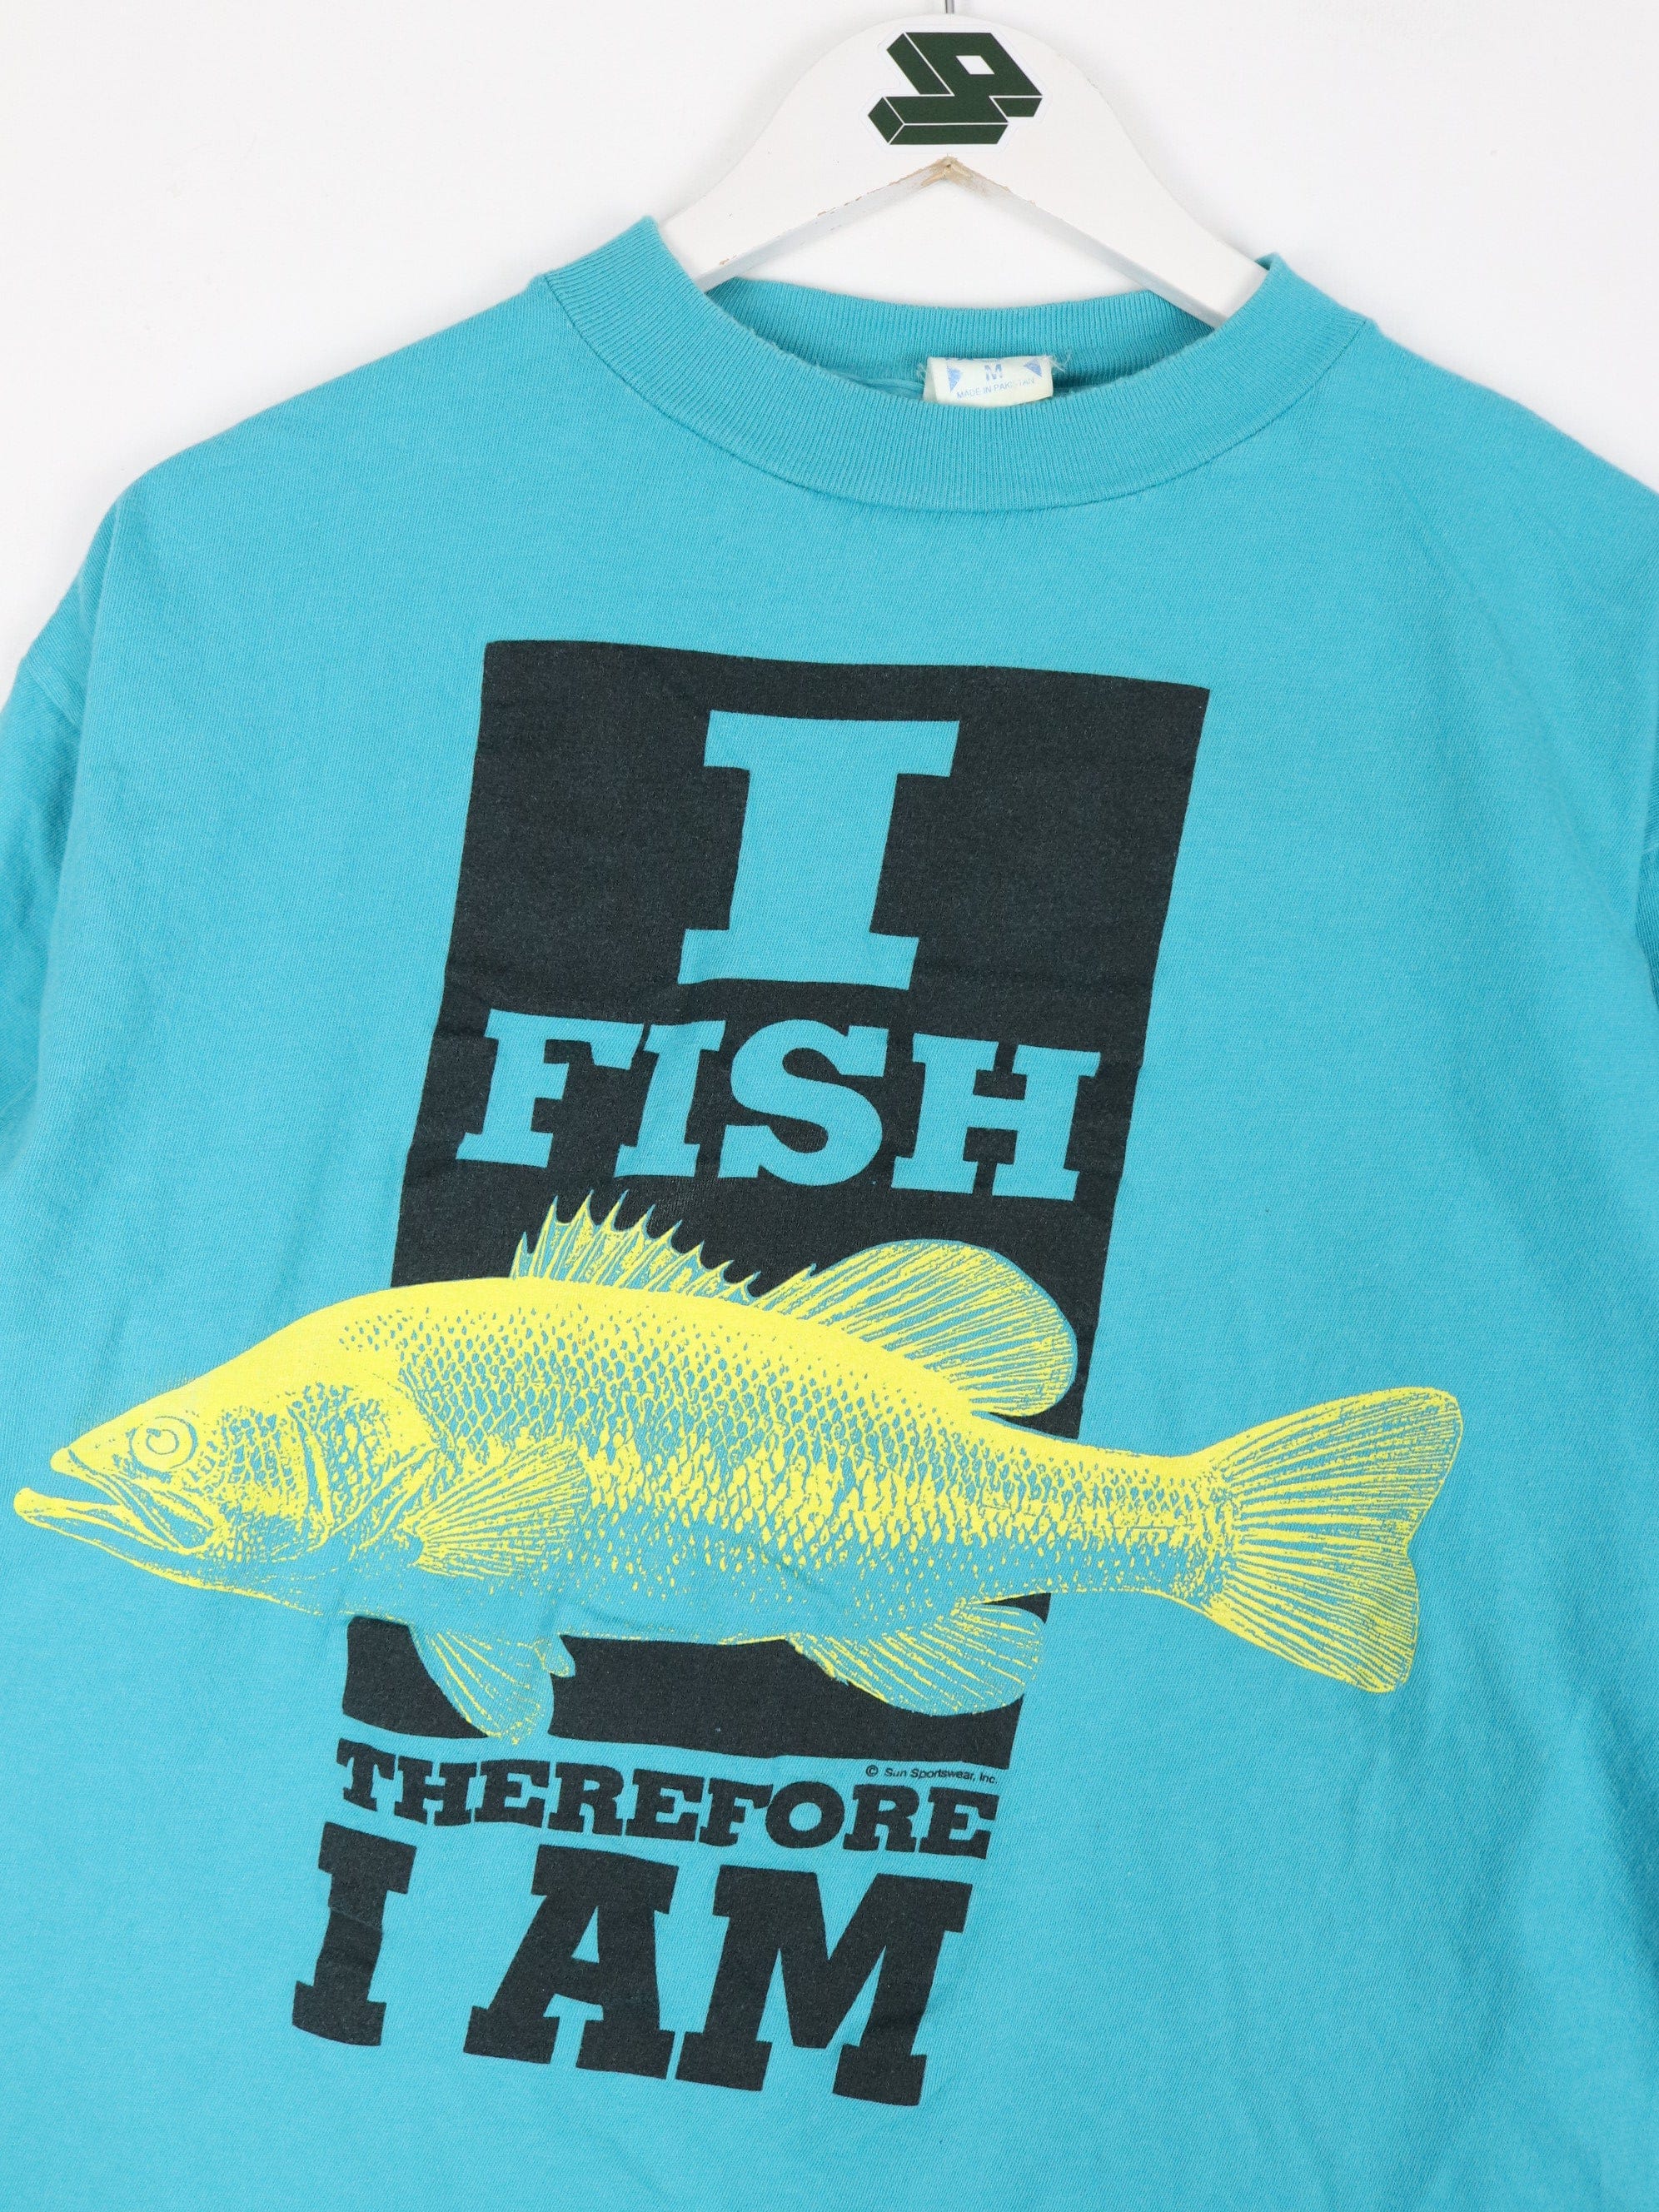 Vintage I Fish Therefore I Am T Shirt Mens Medium Blue 90s Funny